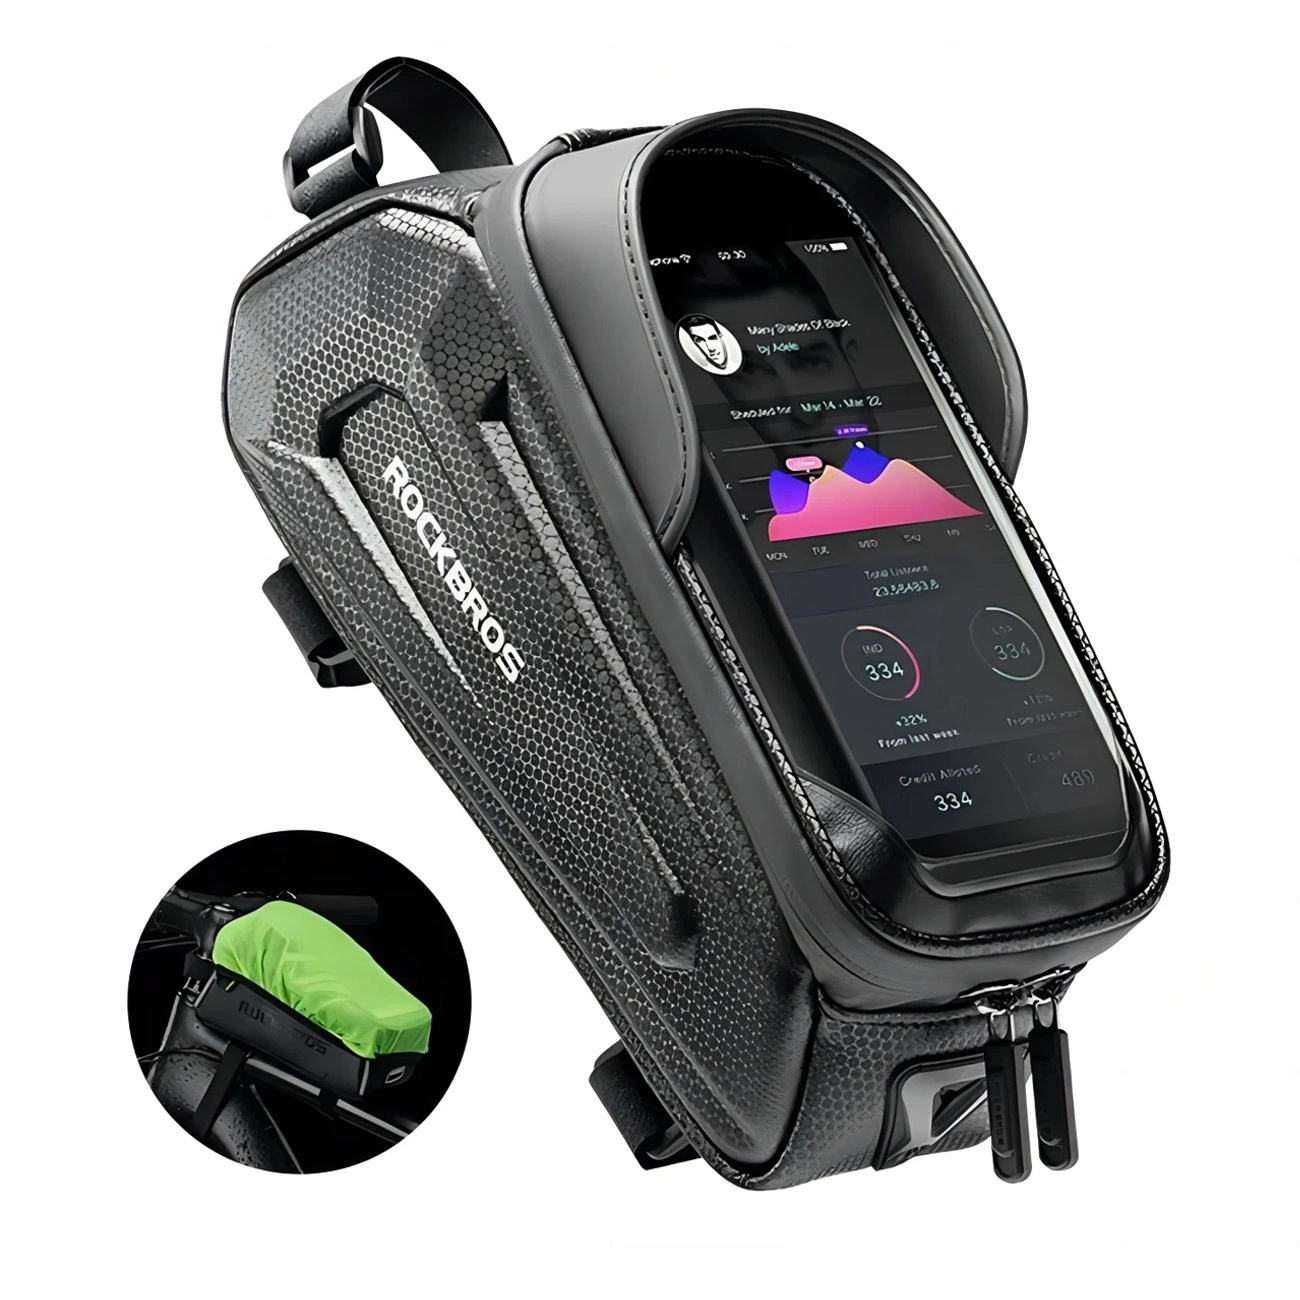 Rockbros B68 armored bicycle bag with phone cover - black on white background